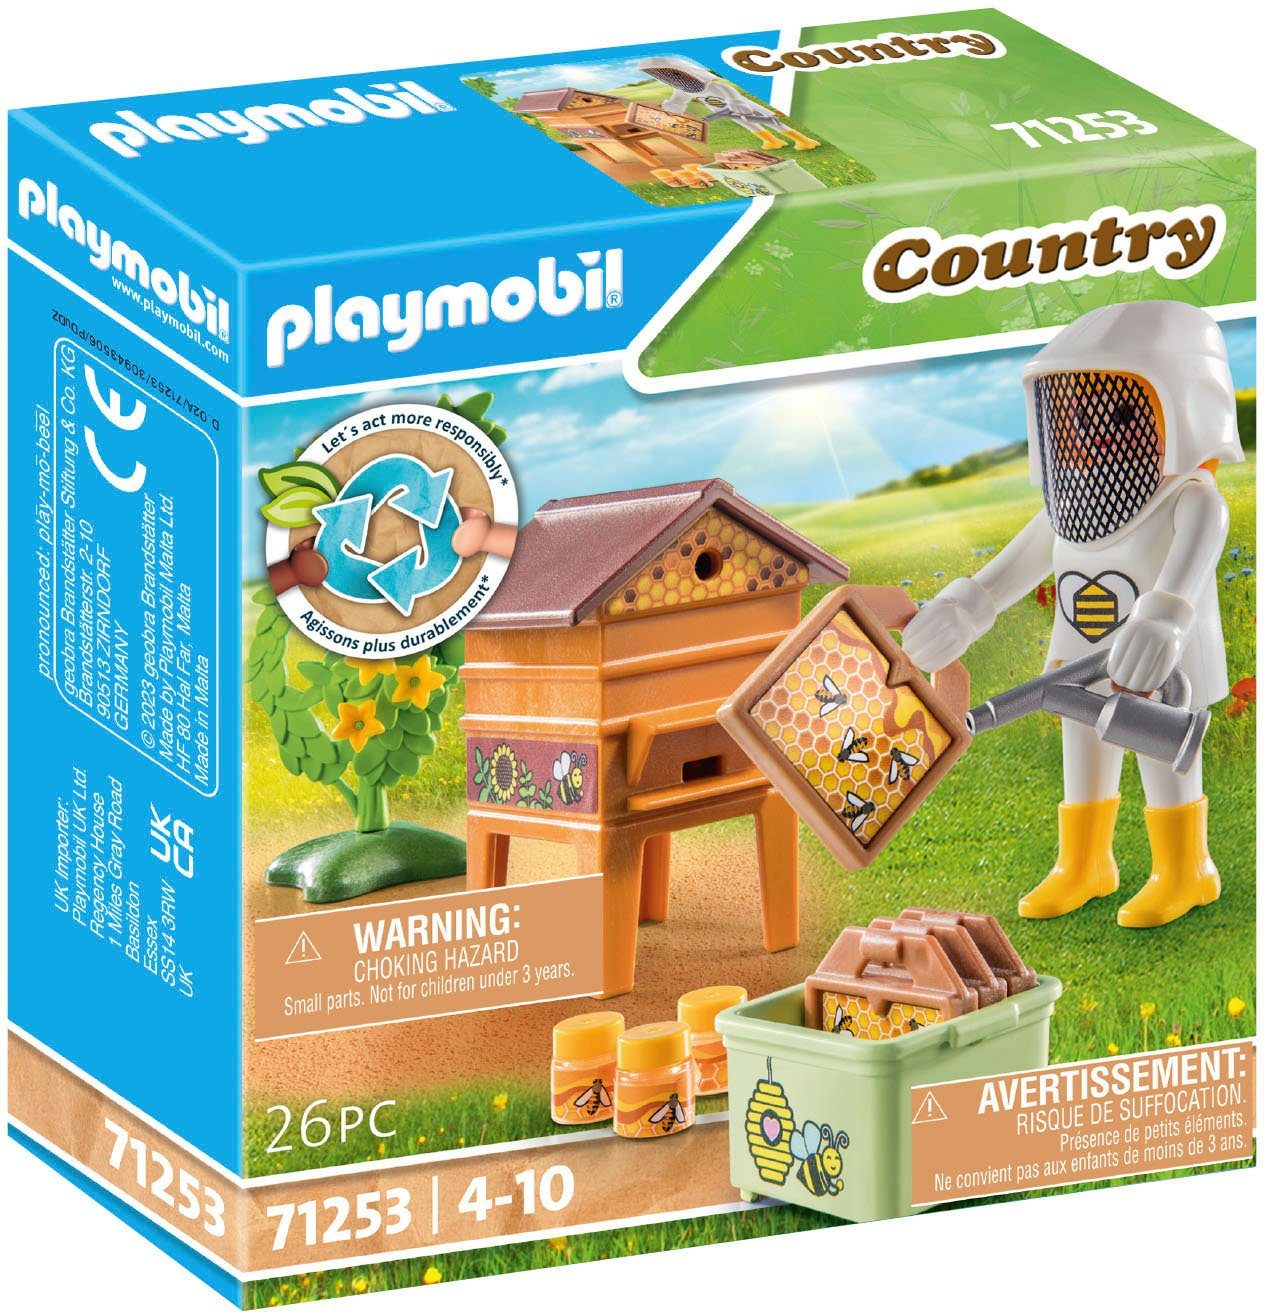 Playmobil® Konstruktions-Spielset Imkerin (71253), Country, teilweise aus recyceltem Material; Made in Europe